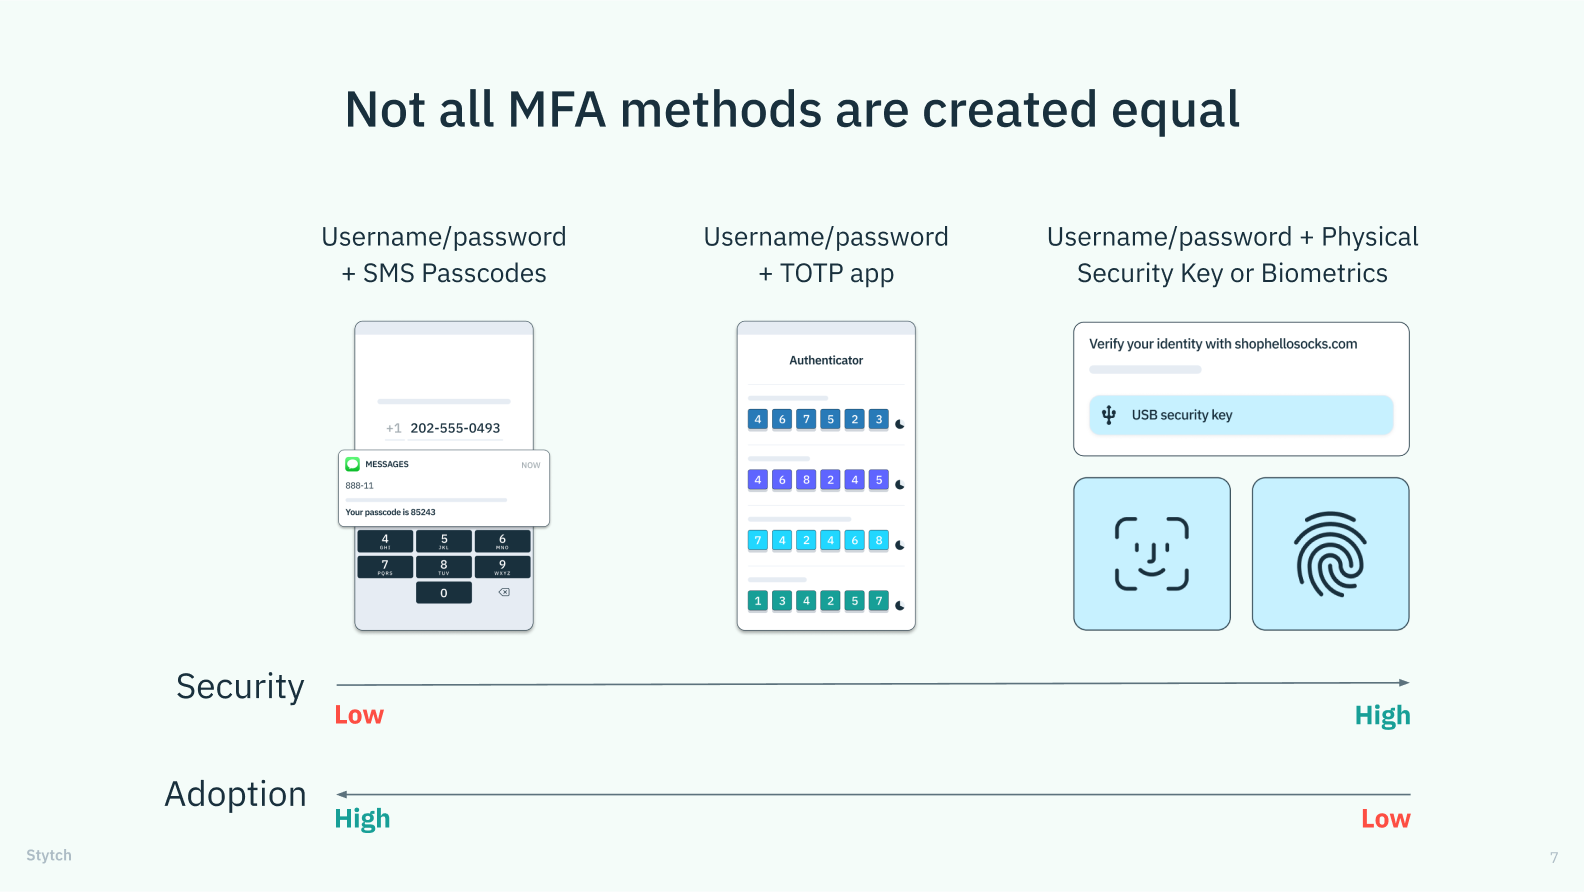 The text "Not all MFA factors are created equal," above a graph comparing SMS OTPs, TOTPs, and Usernames and passwords on the scales of security and adoption